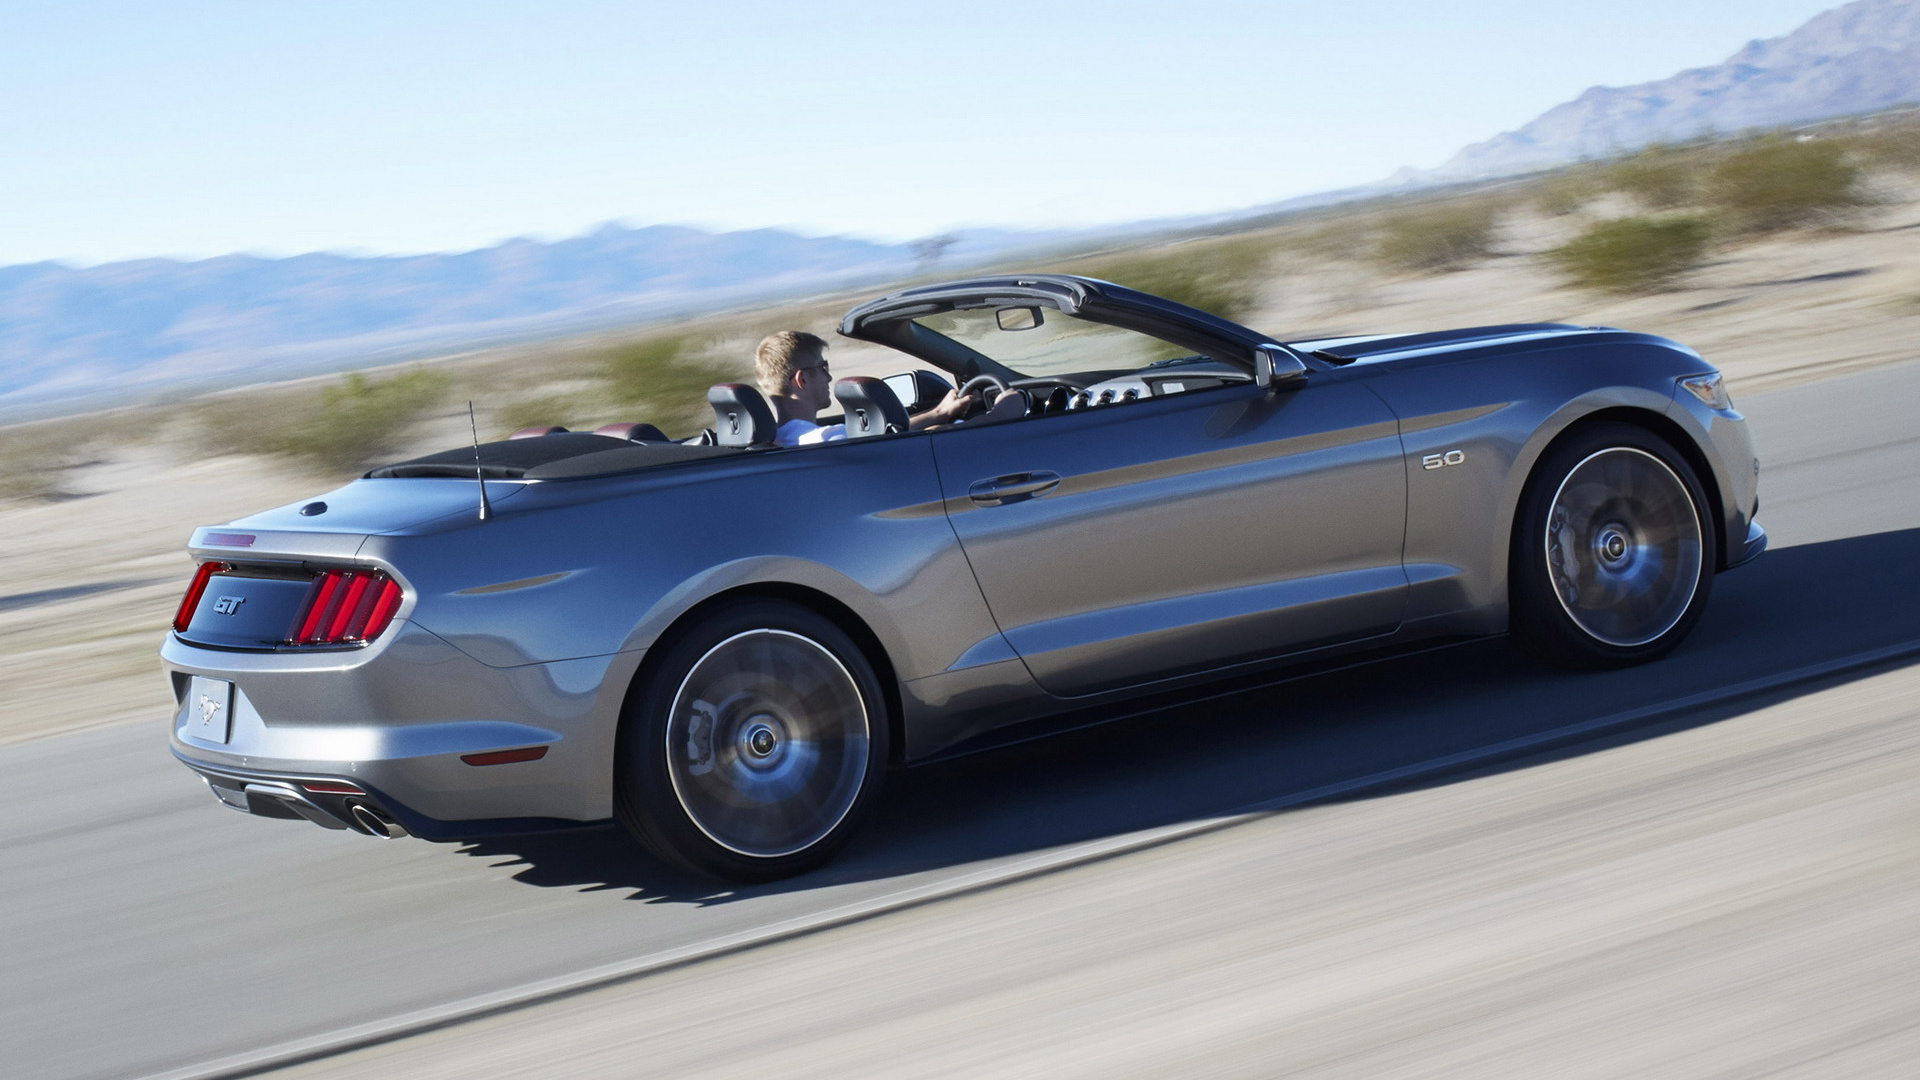 Ford Mustang Gt Convertible Wallpaper And HD Image